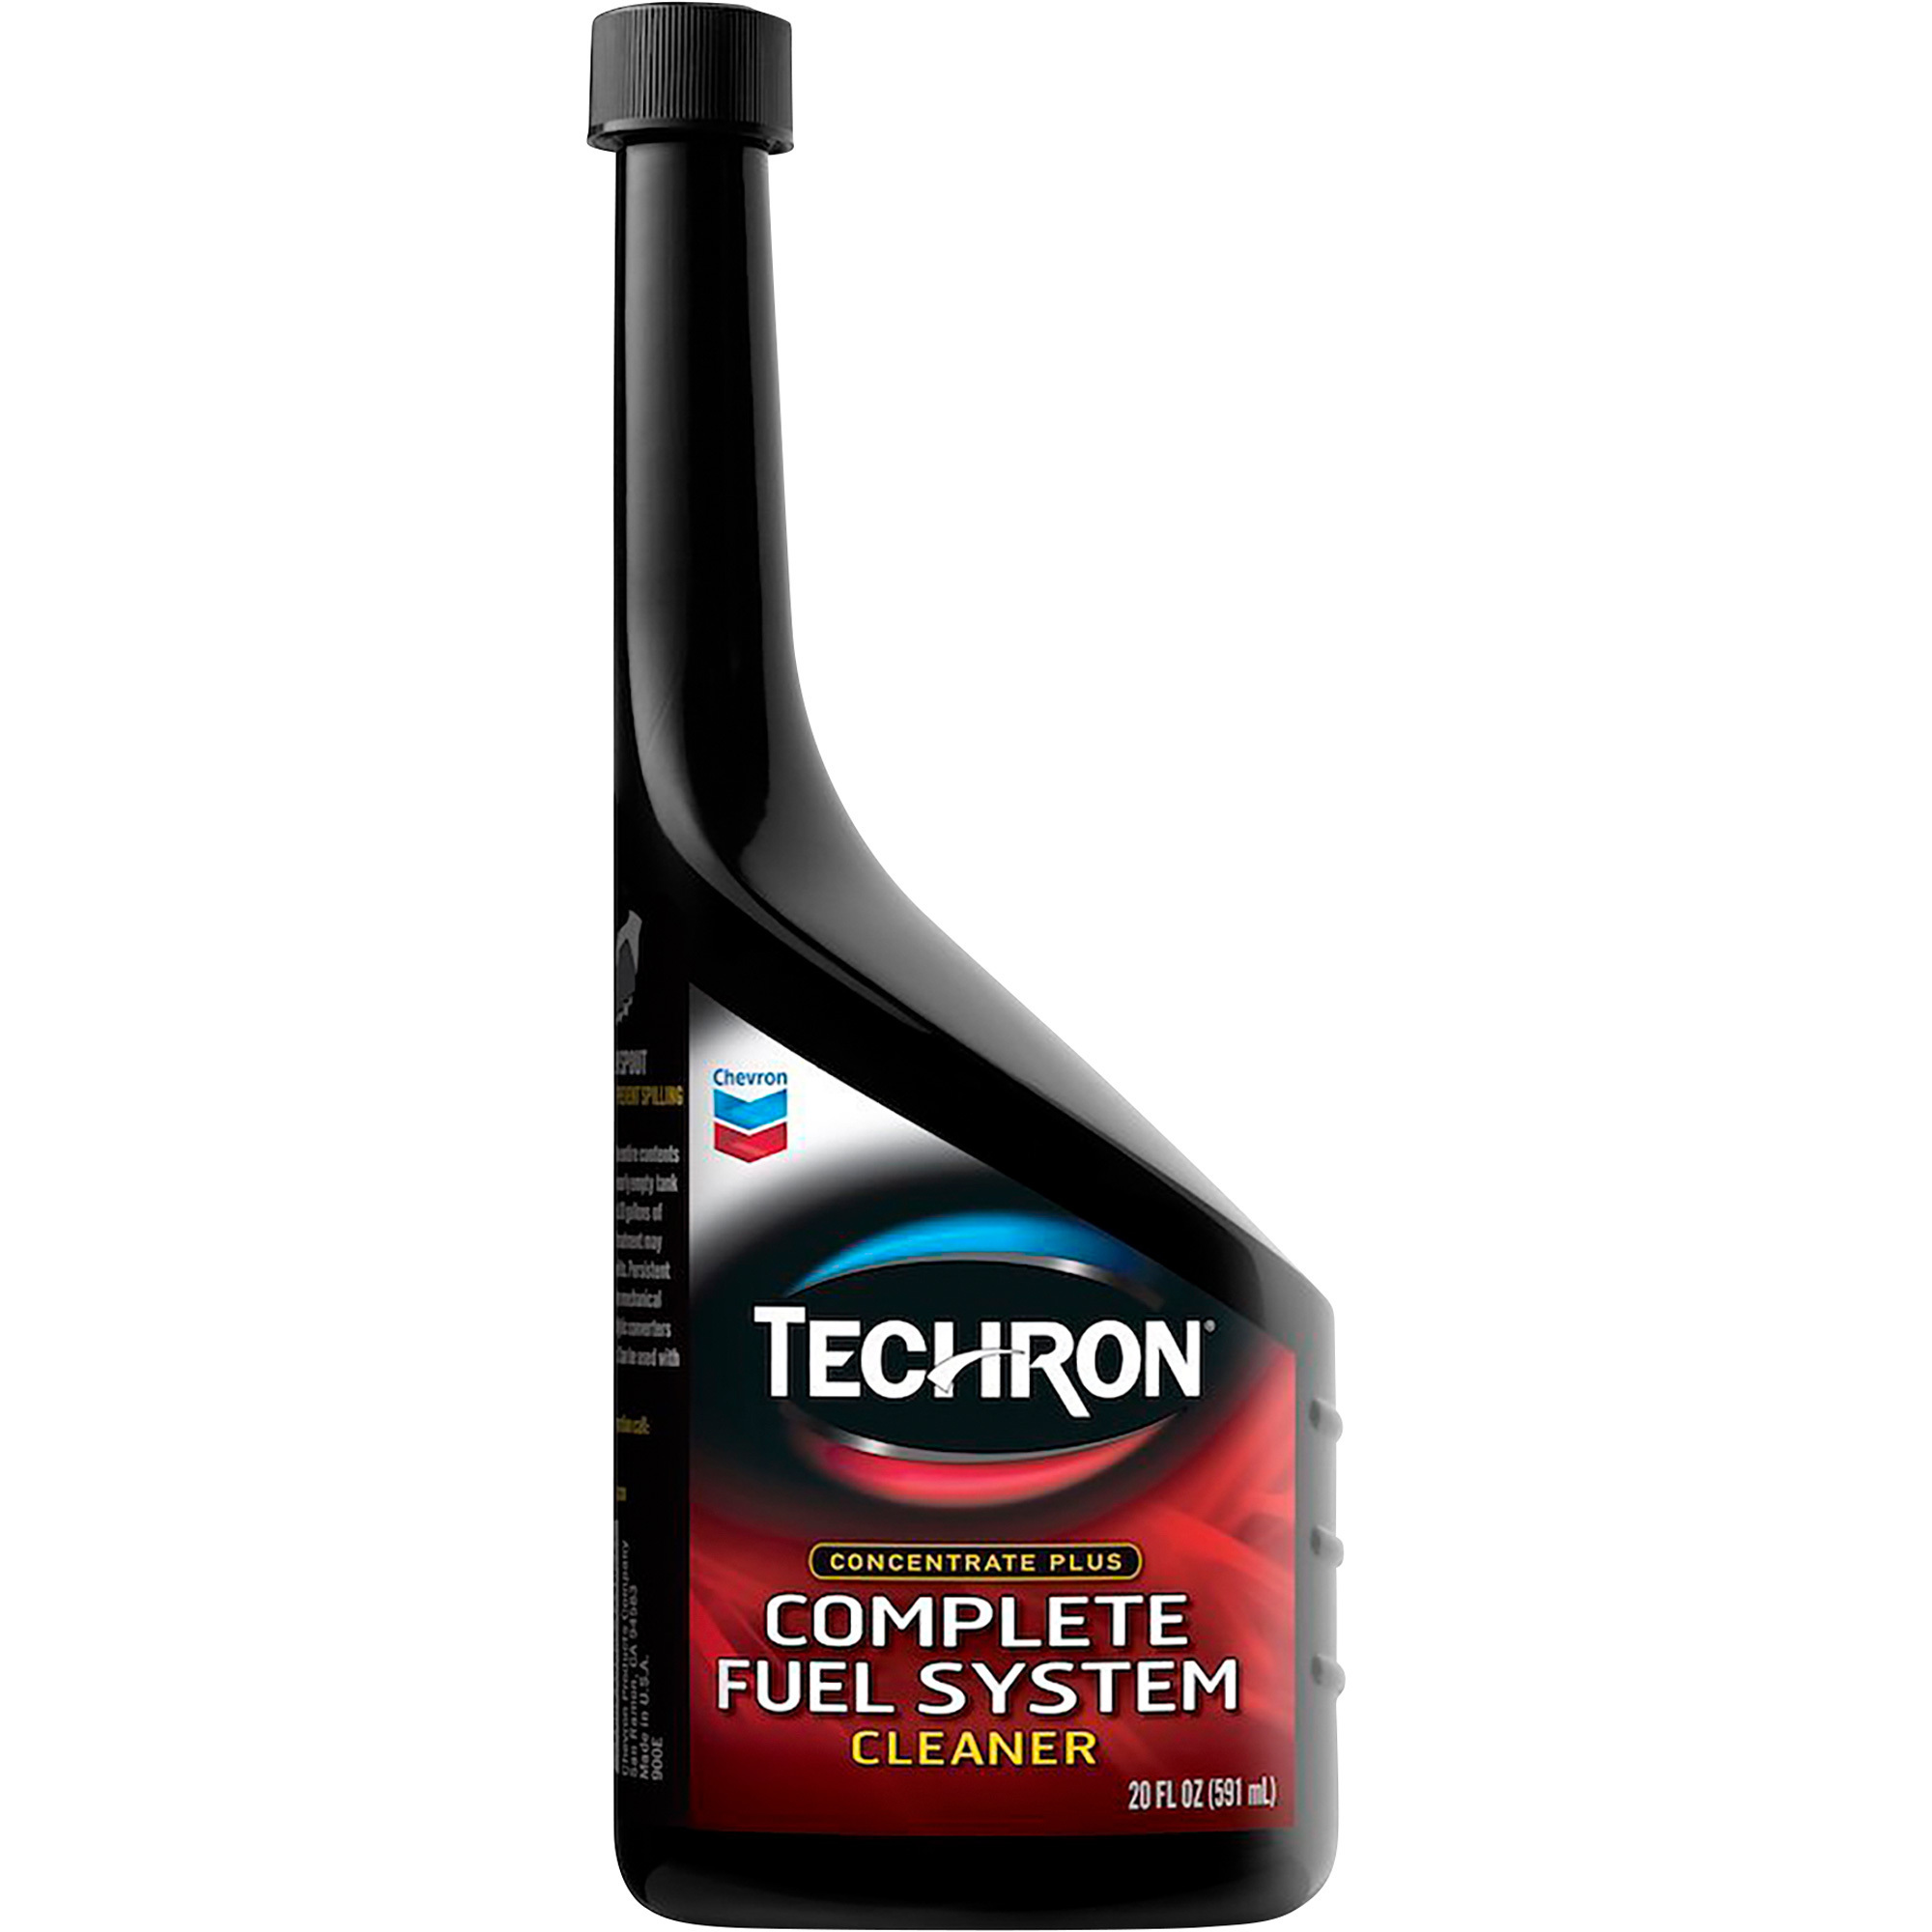 Techron Concentrate Plus Complete Fuel System Cleaner â 20-Oz., Bottle, Model CHEV65740